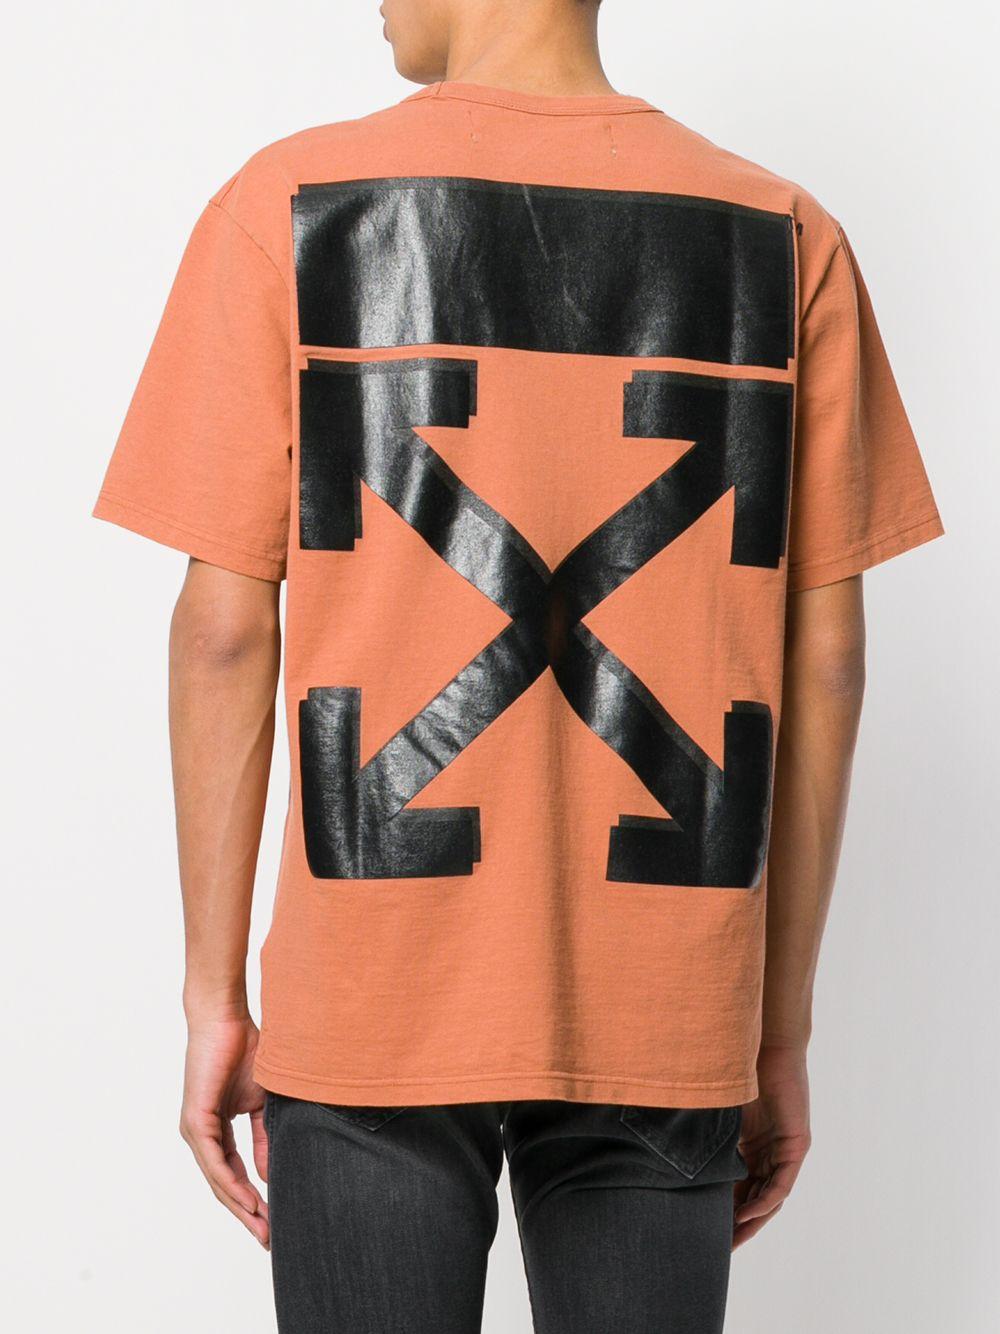 Off-White Virgil Abloh Cotton X Champion Oversized T-shirt in Brown for Men - Lyst